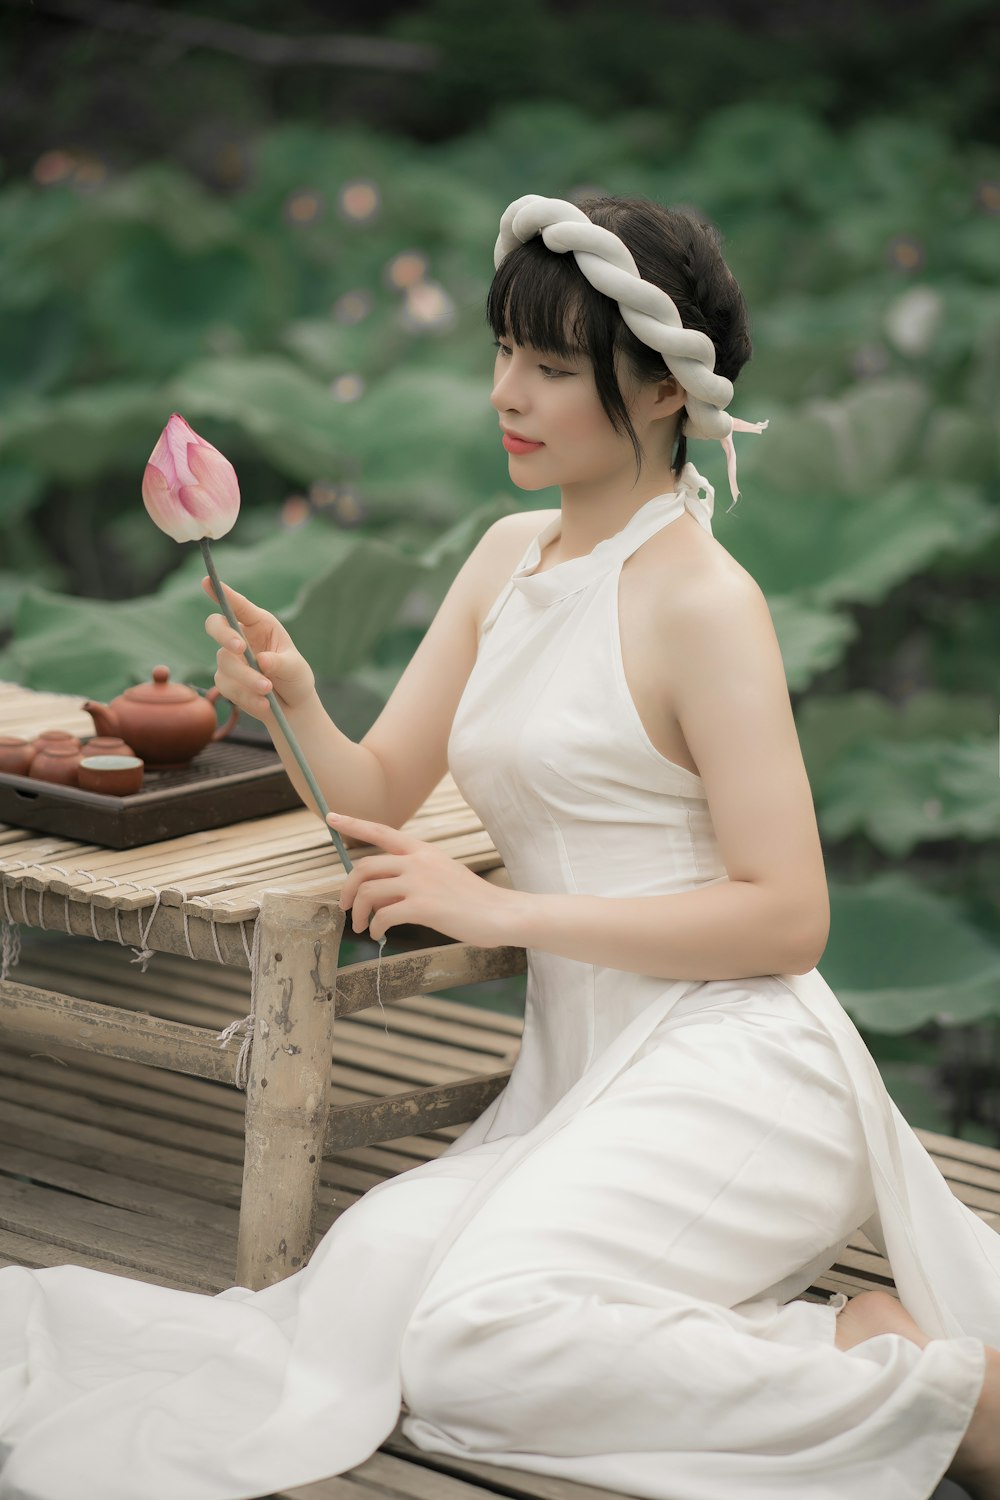 woman in white sleeveless dress sitting on brown wooden bench